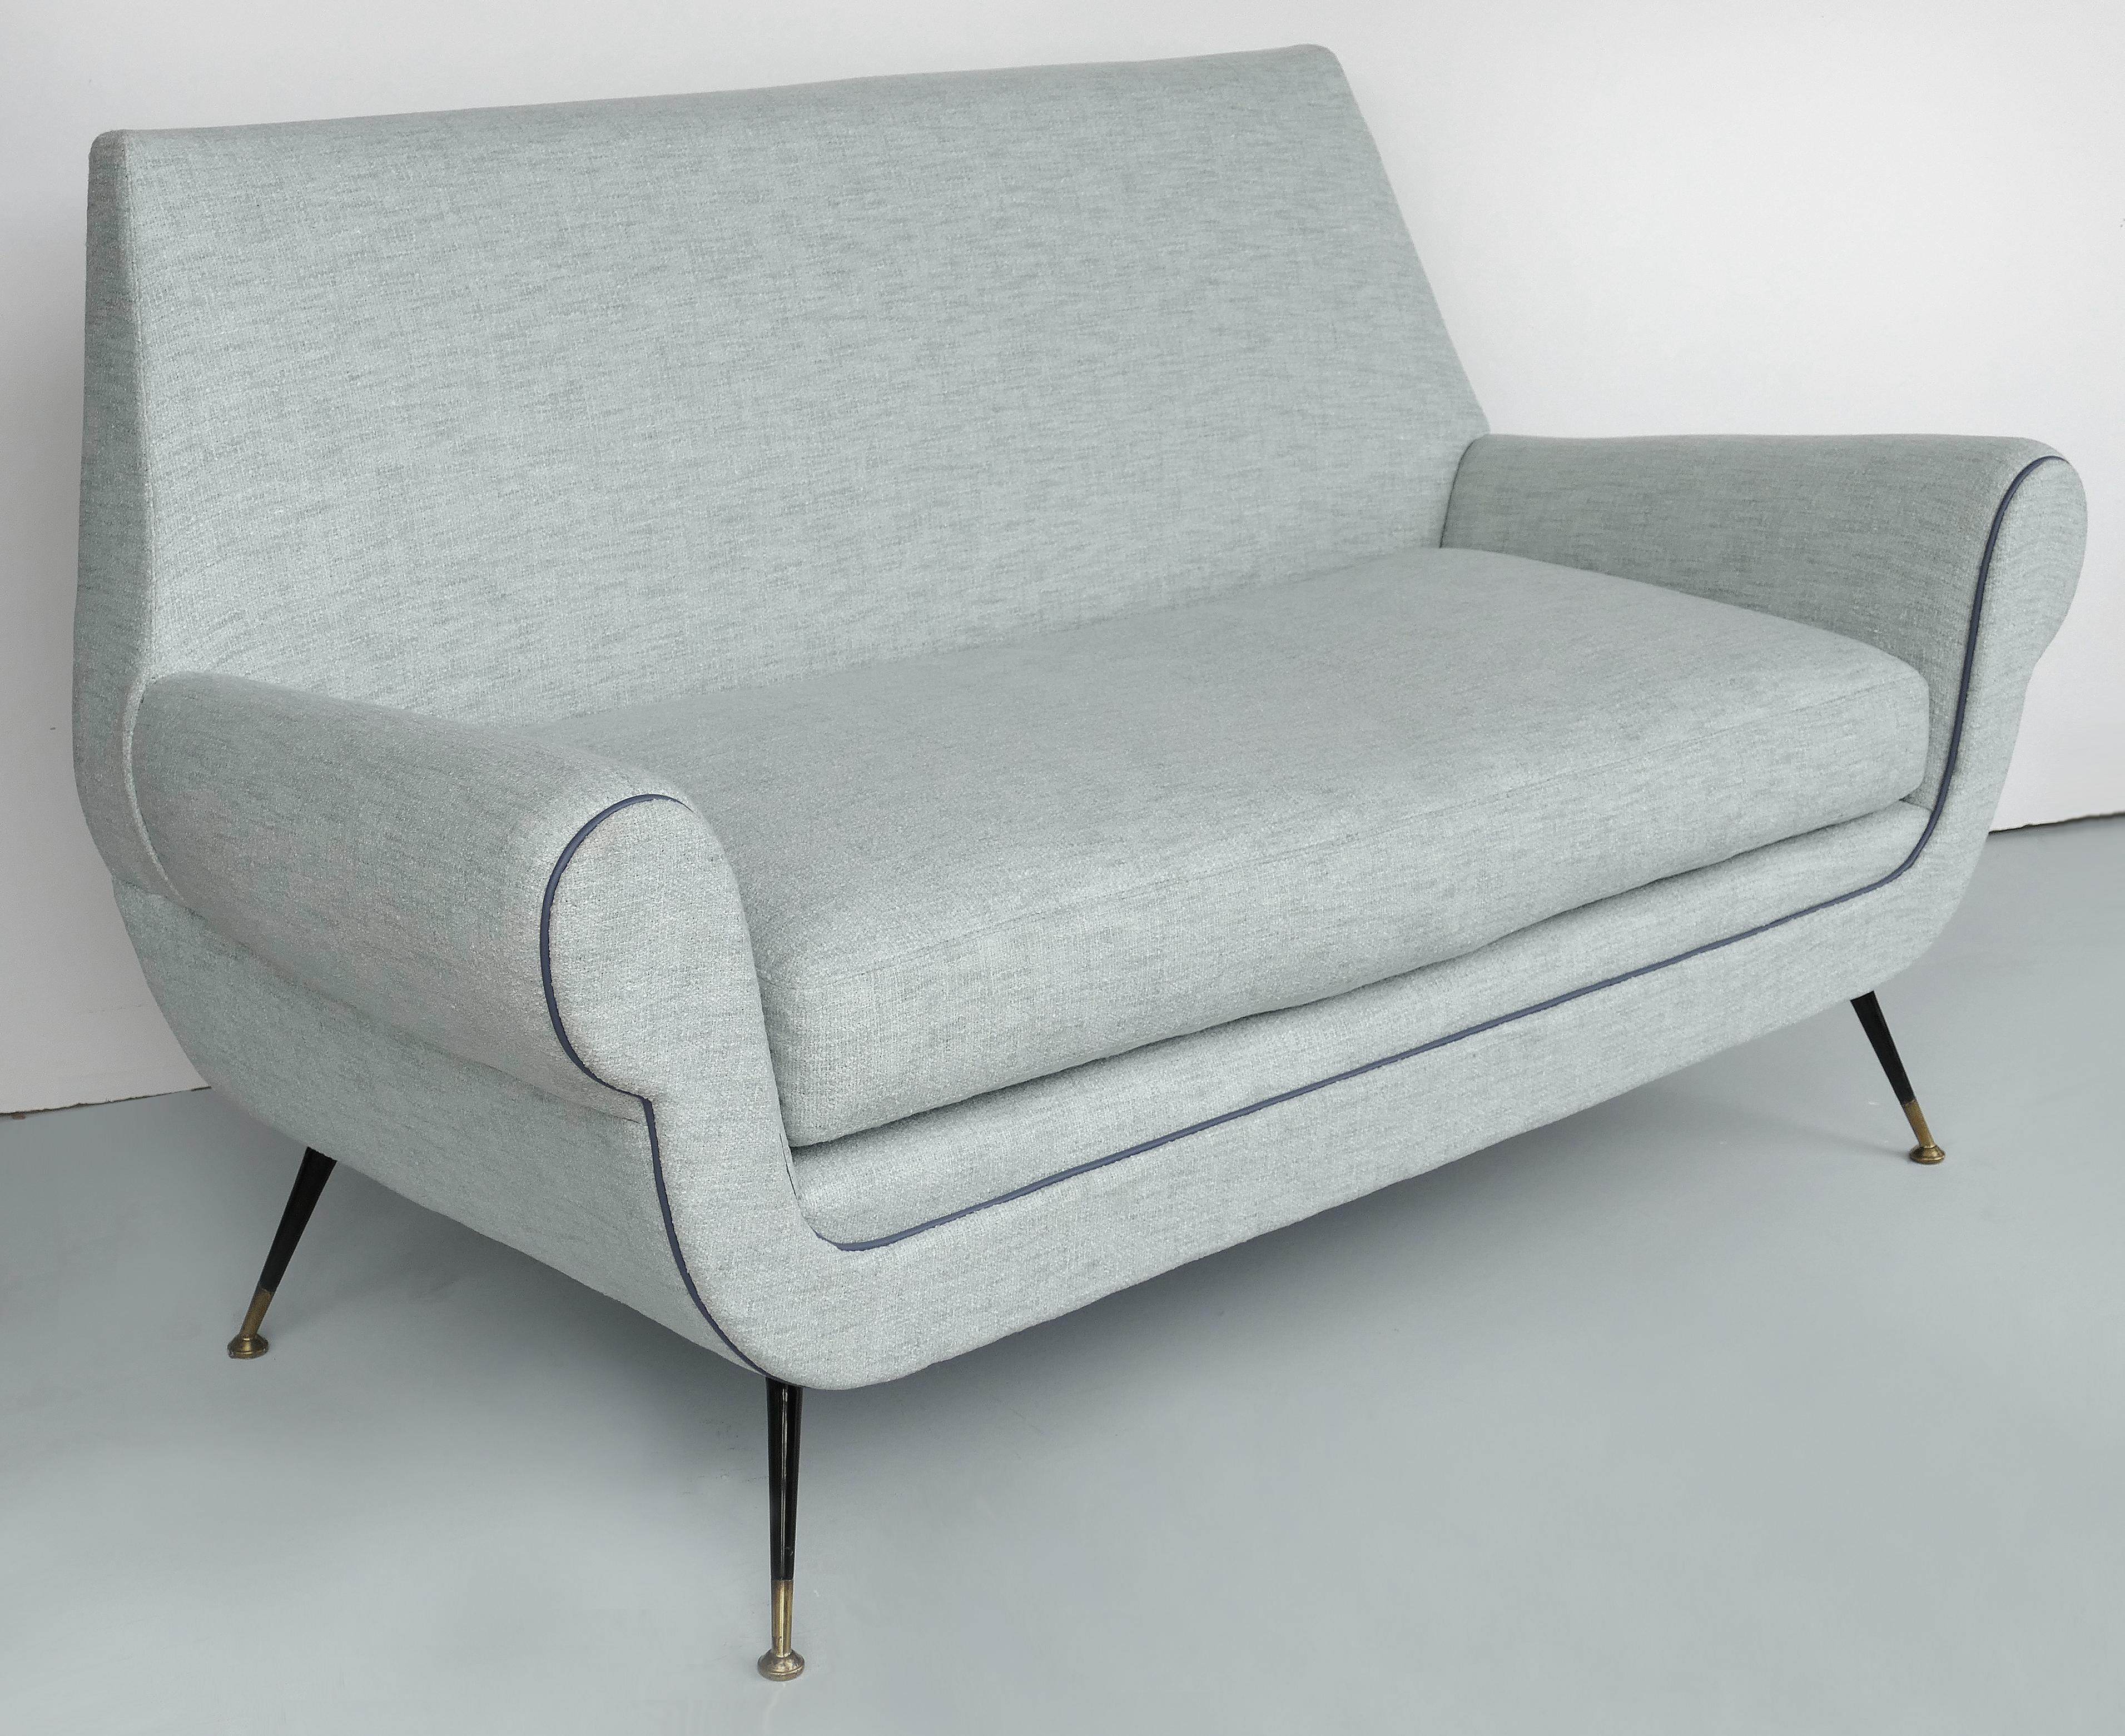 Gigi Radice for Minotti Italian modern settee sofa, circa 1950.

Offered for sale is a newly upholstered Italian Modern settee sofa by Gigi Radice for Minotti. The circa 1950s two-seat sofa has tapered and splayed iron and bronze legs. The